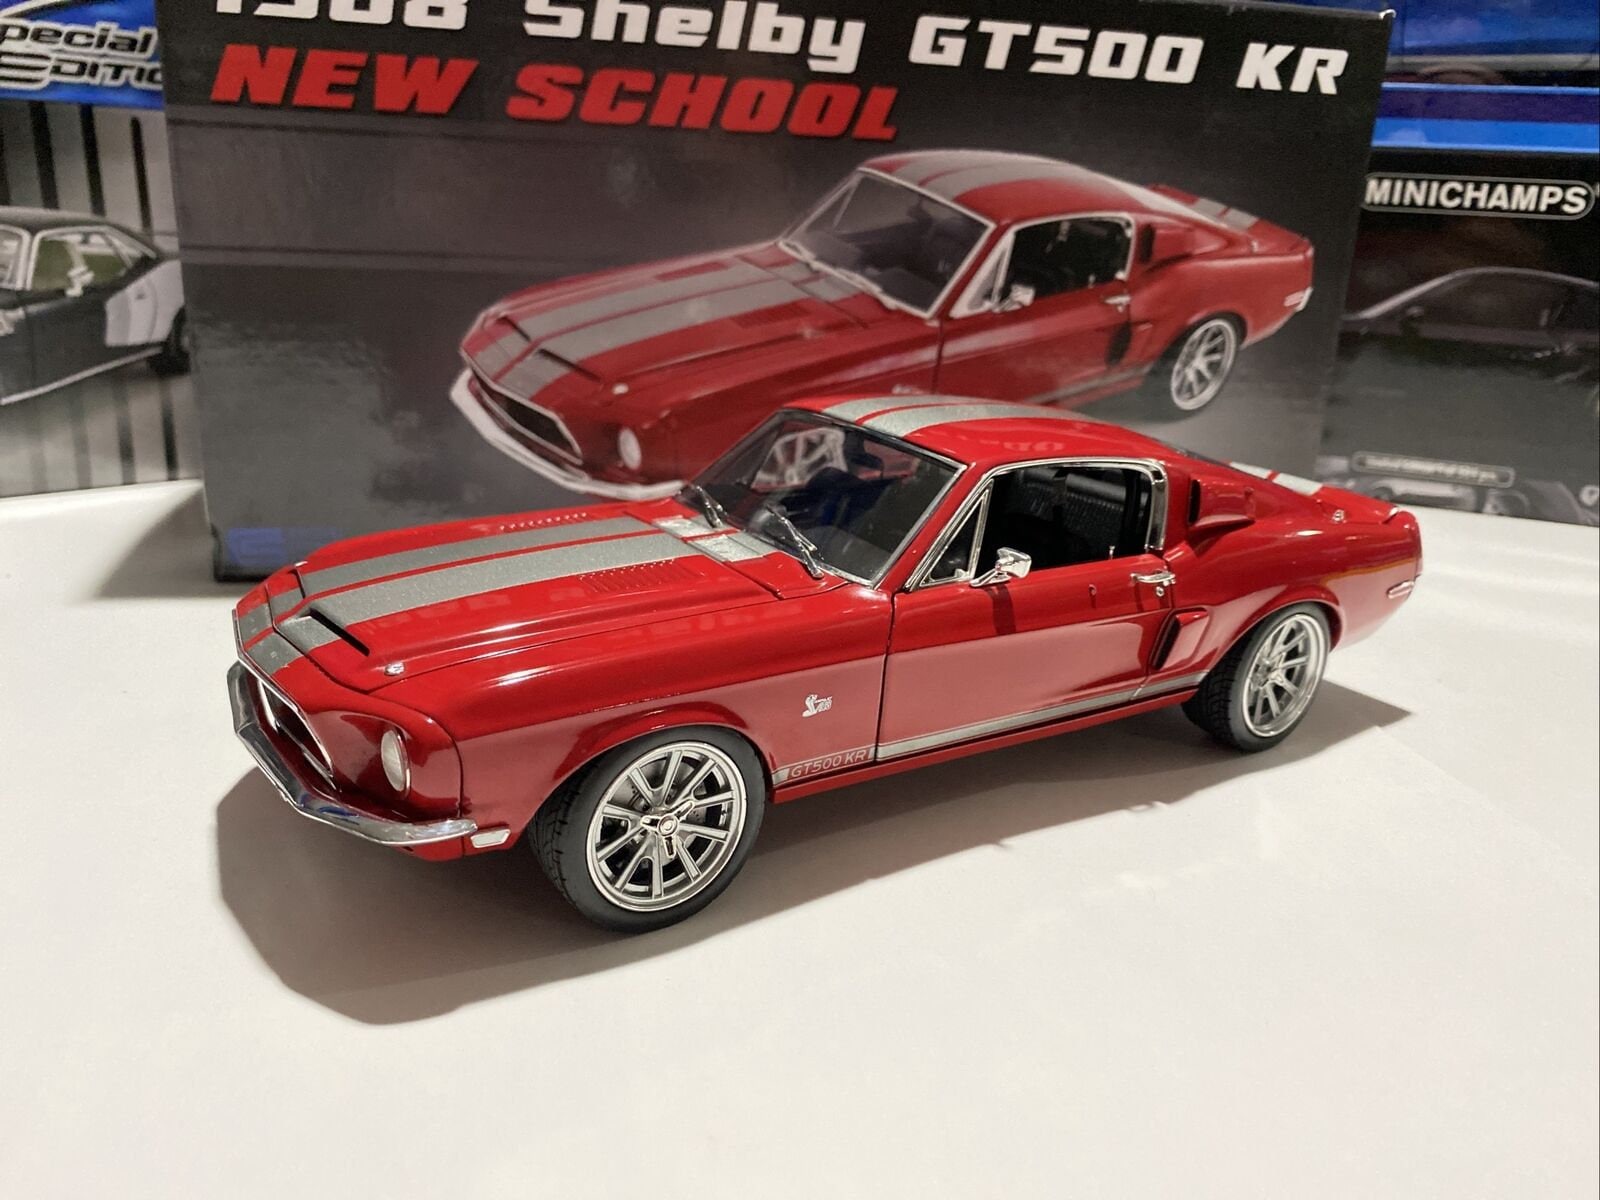 1968 Ford Mustang Shelby GT500 KR Restored Red 1/18 Scale Diecast Model Car  by ACME A1801850 Limited Edition 